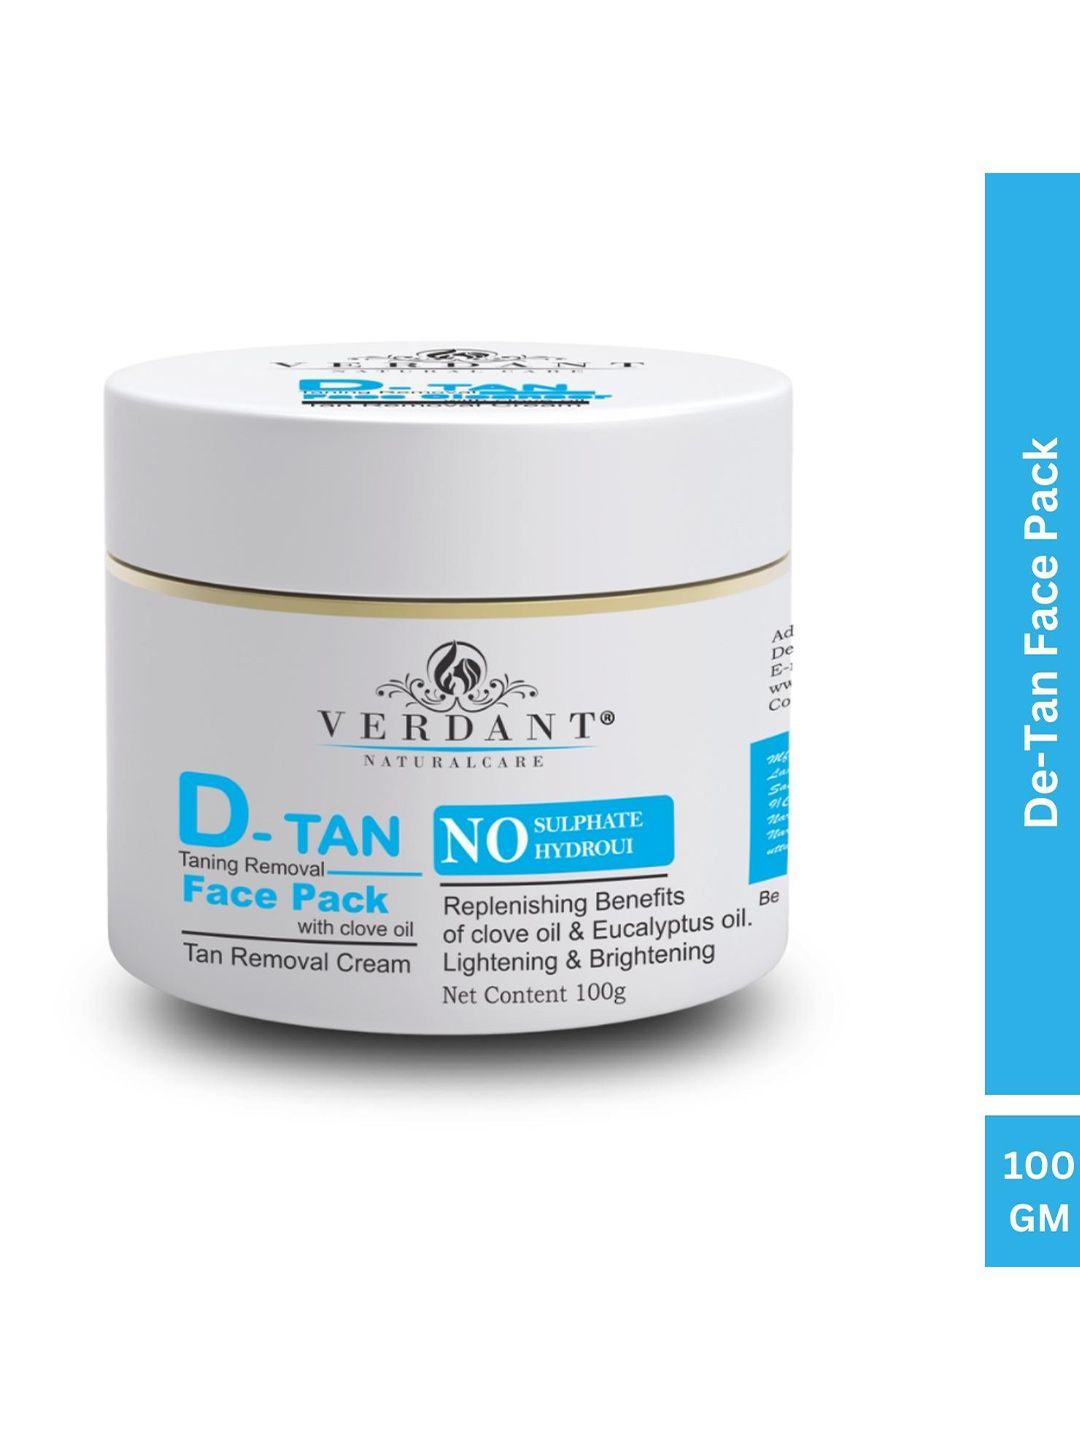 verdant natural care d-tan and tan removal face pack 100g